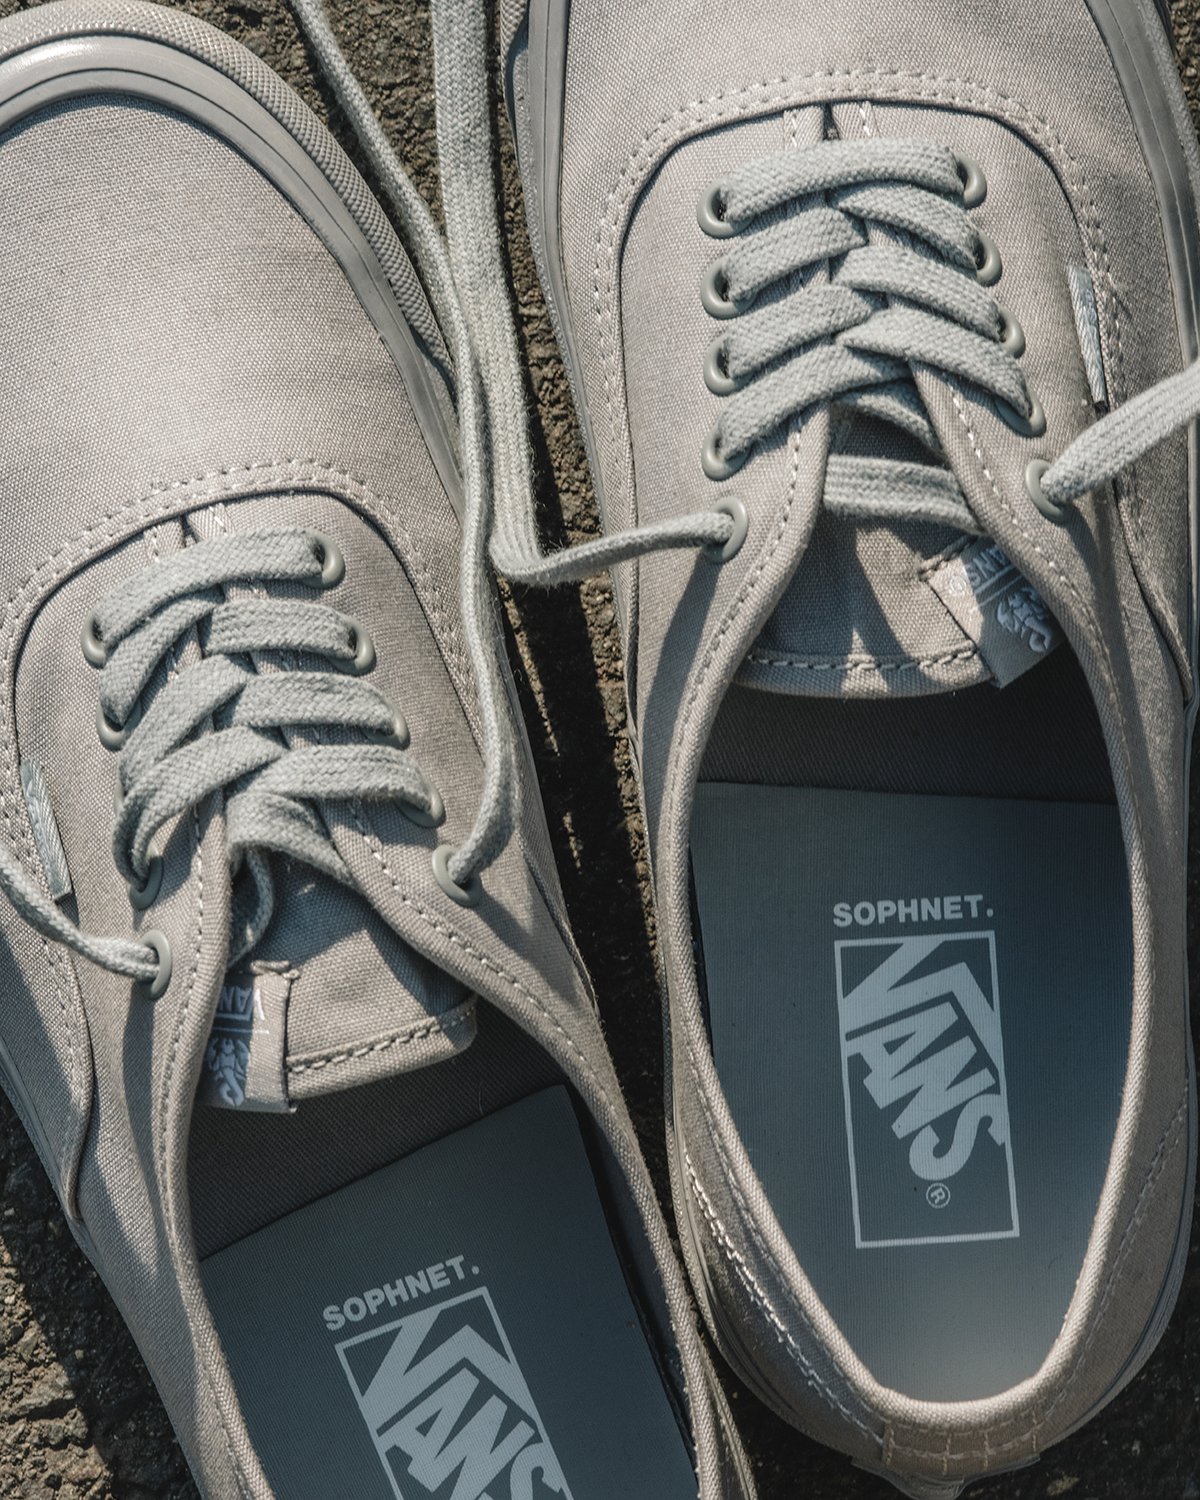 SOPHNET. and Vans Unveil Collaborative Versions of the Old Skool